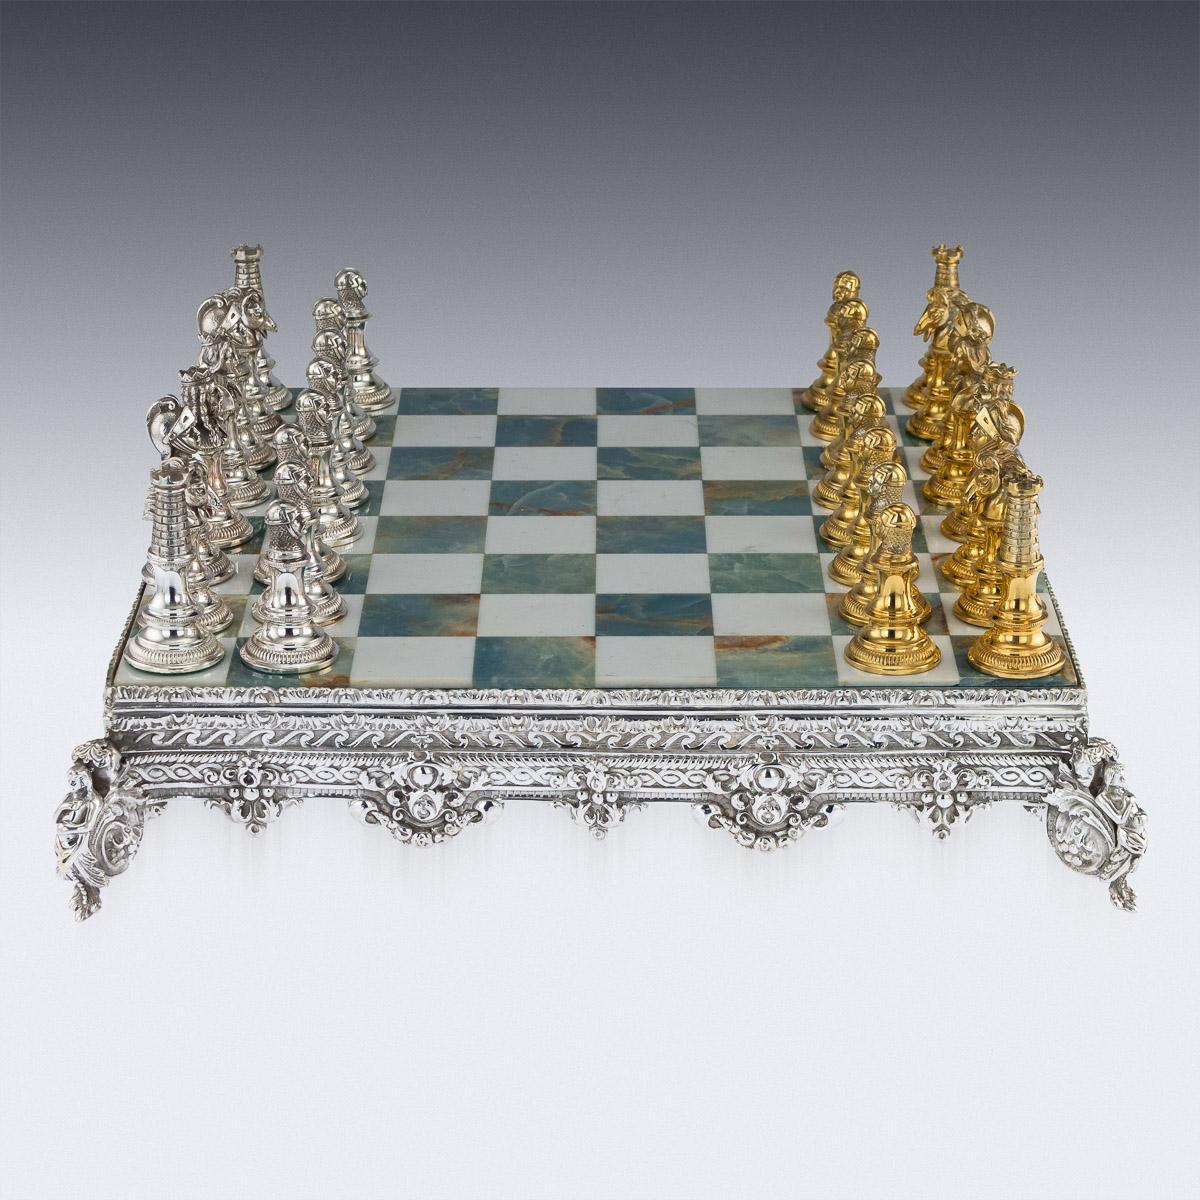 Stunning 20th century Italian solid silver chess set pieces on silver plated stand, one set richly gilt, the elaborately decorated board inlaid with blue and white marble. The game pieces hallmarked 